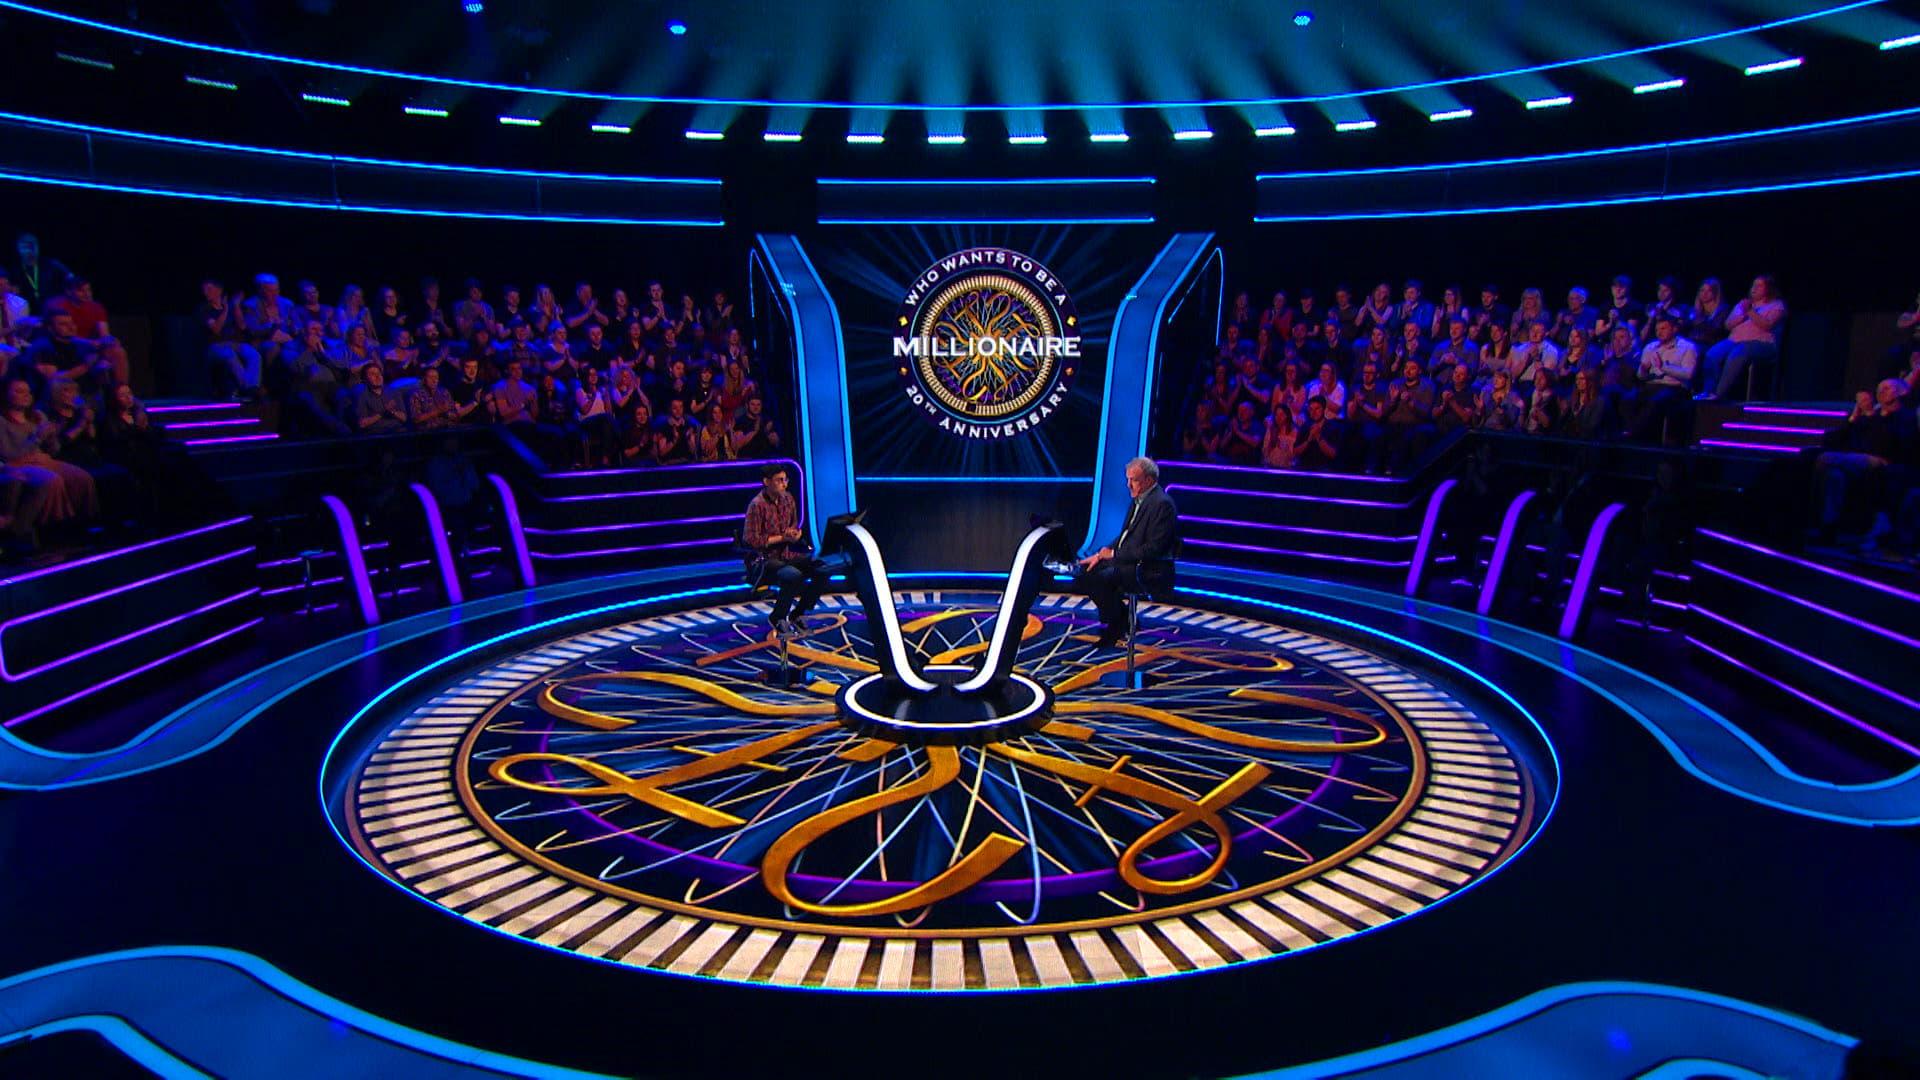 Who Wants to Be a Millionaire? backdrop